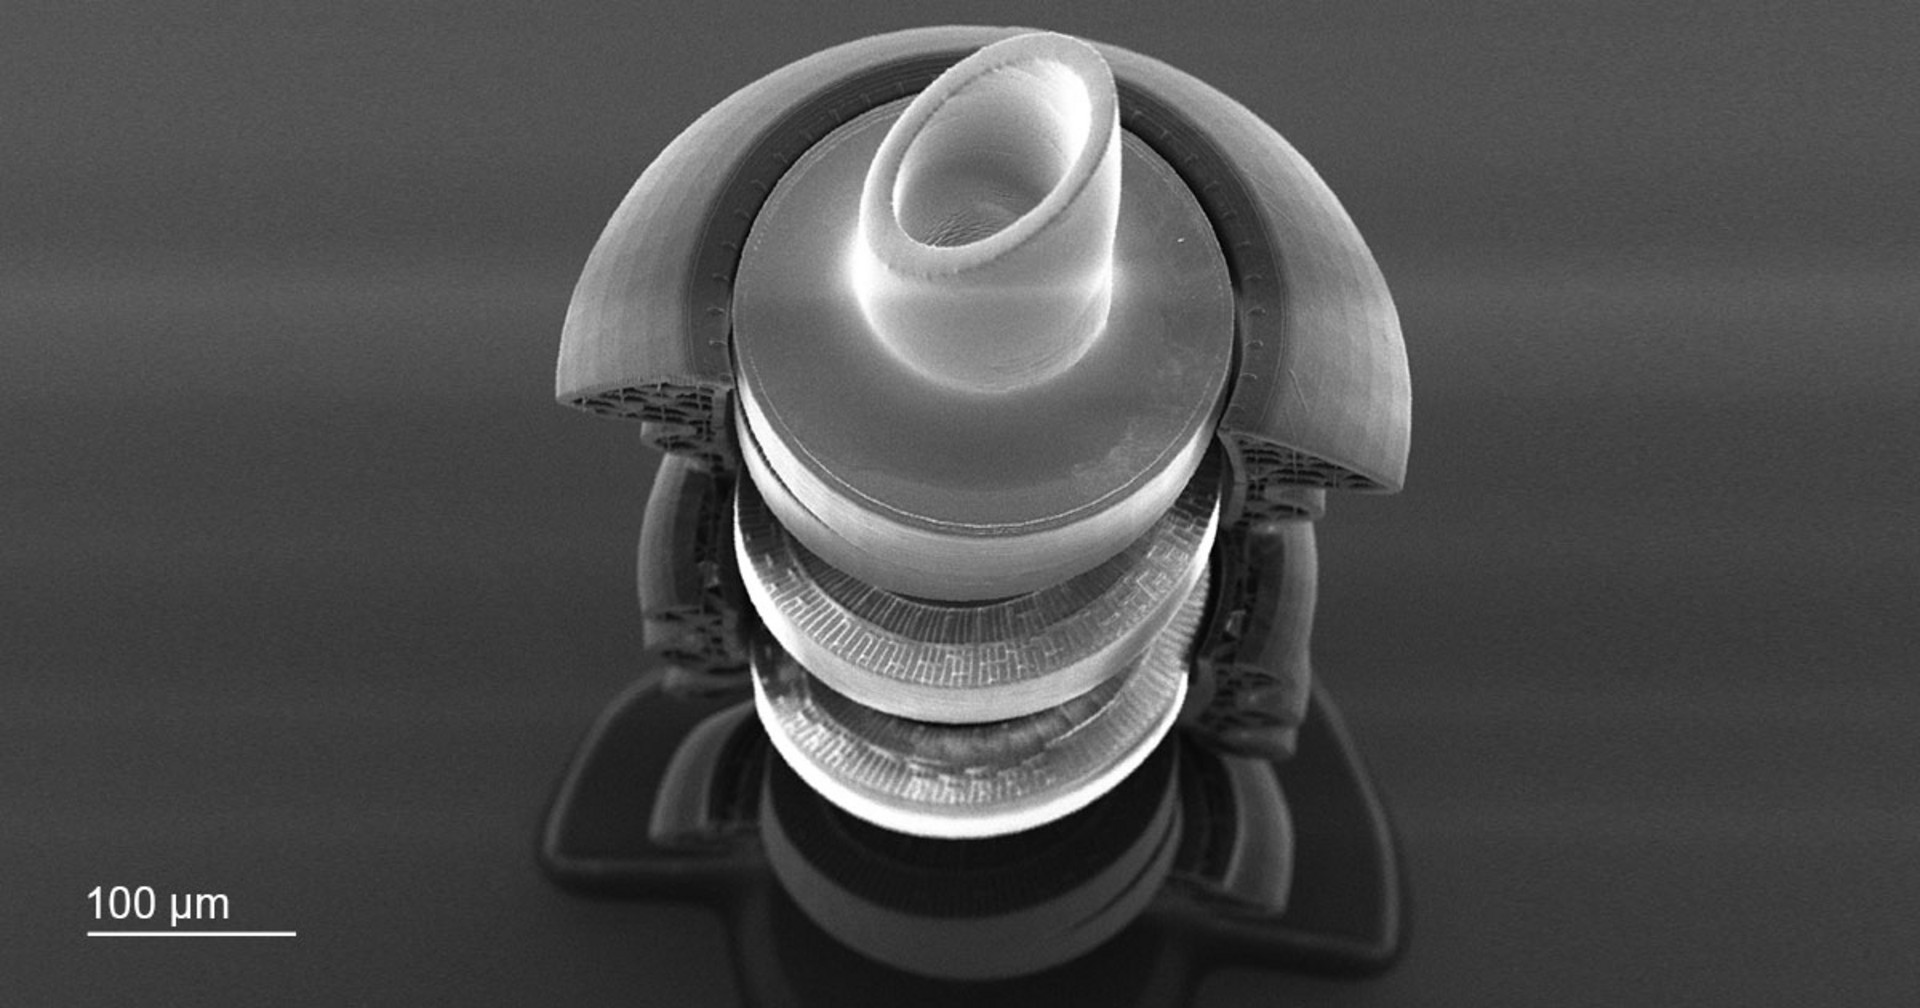 3D-printed microvalve fabricated by the means of a Nanoscribe 3D printer for treating glaucoma